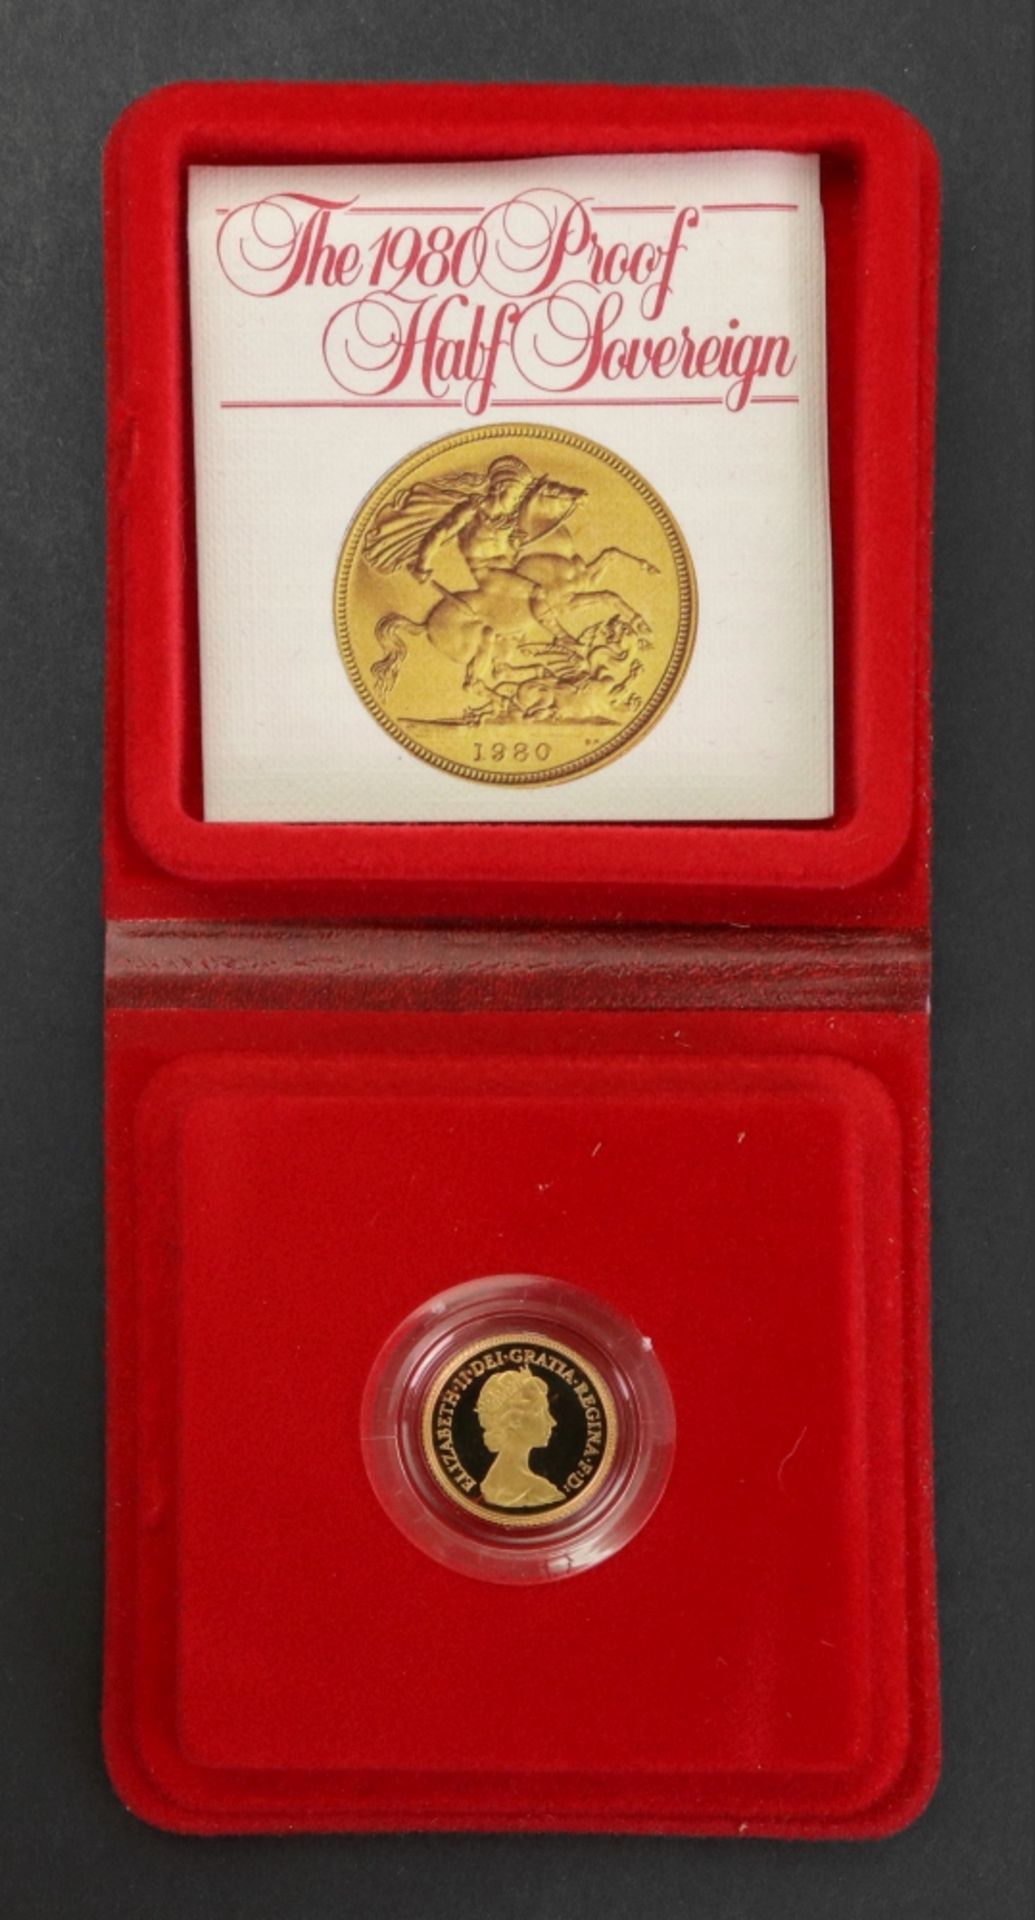 1980 Proof half sovereign, cased.